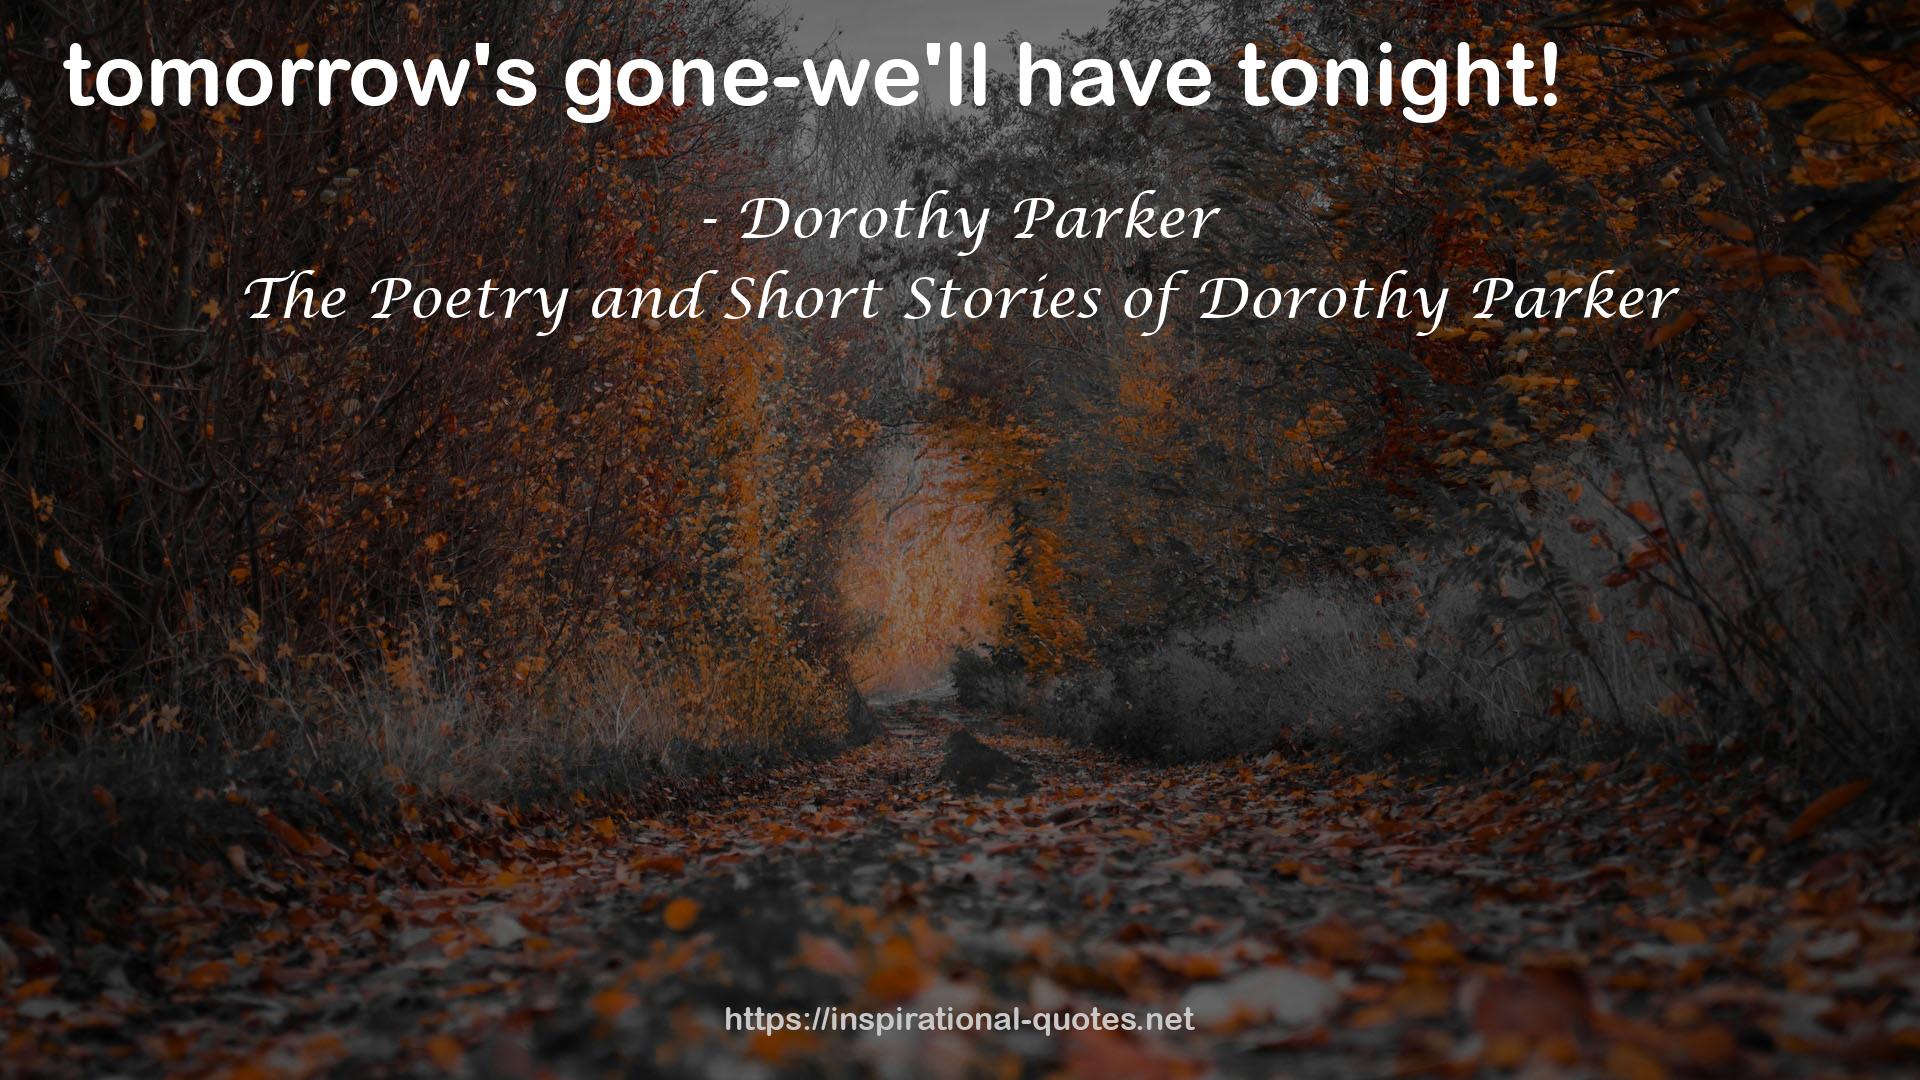 The Poetry and Short Stories of Dorothy Parker QUOTES